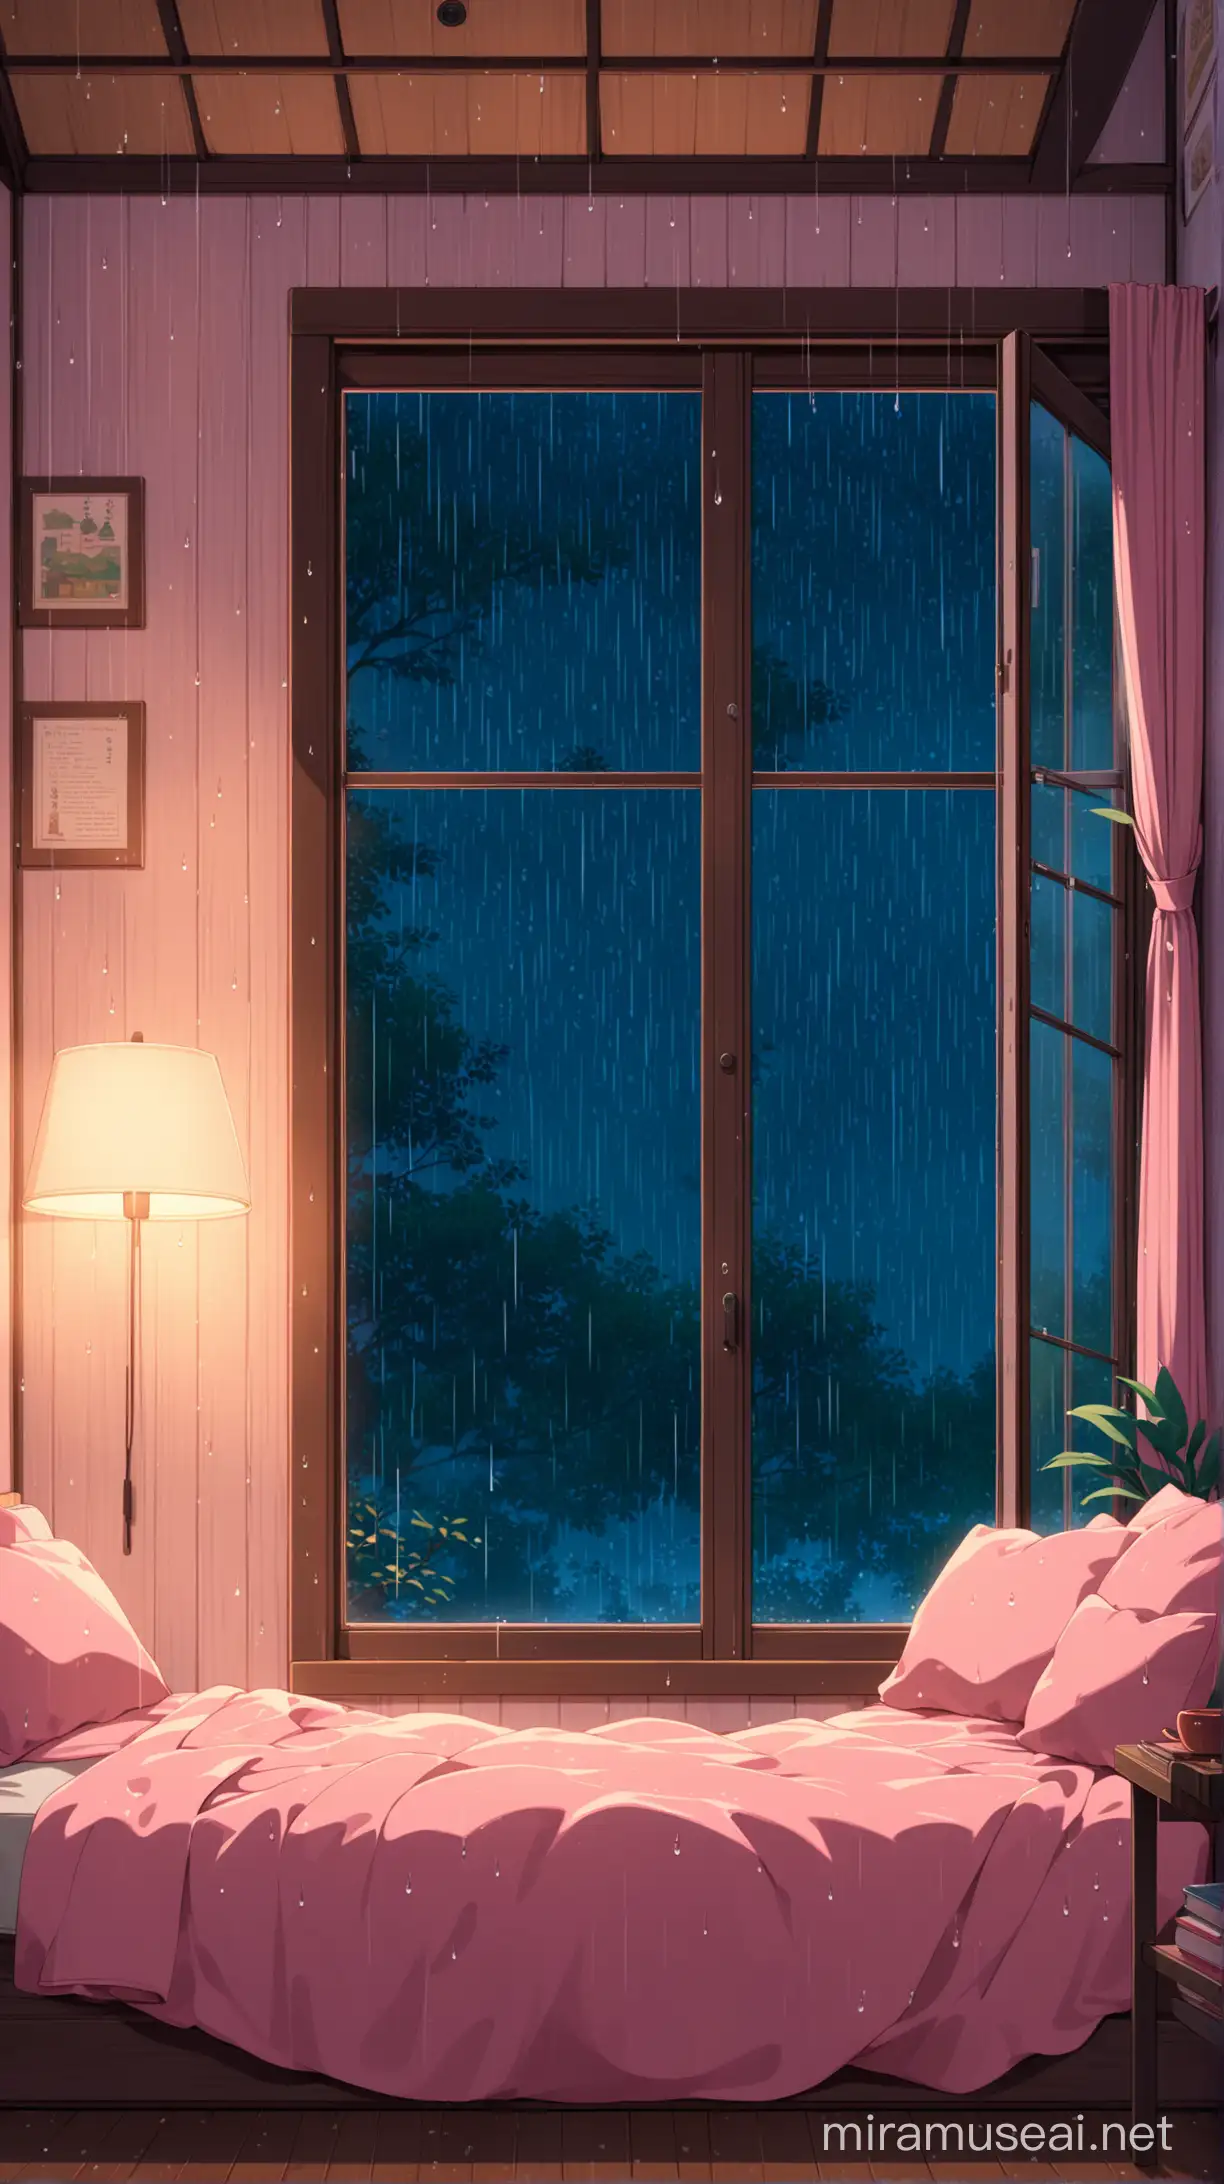 image of a reading space in a cozy house with a big window in the background, its raining and night outside, some pink elements, make it look like a ghibli anime